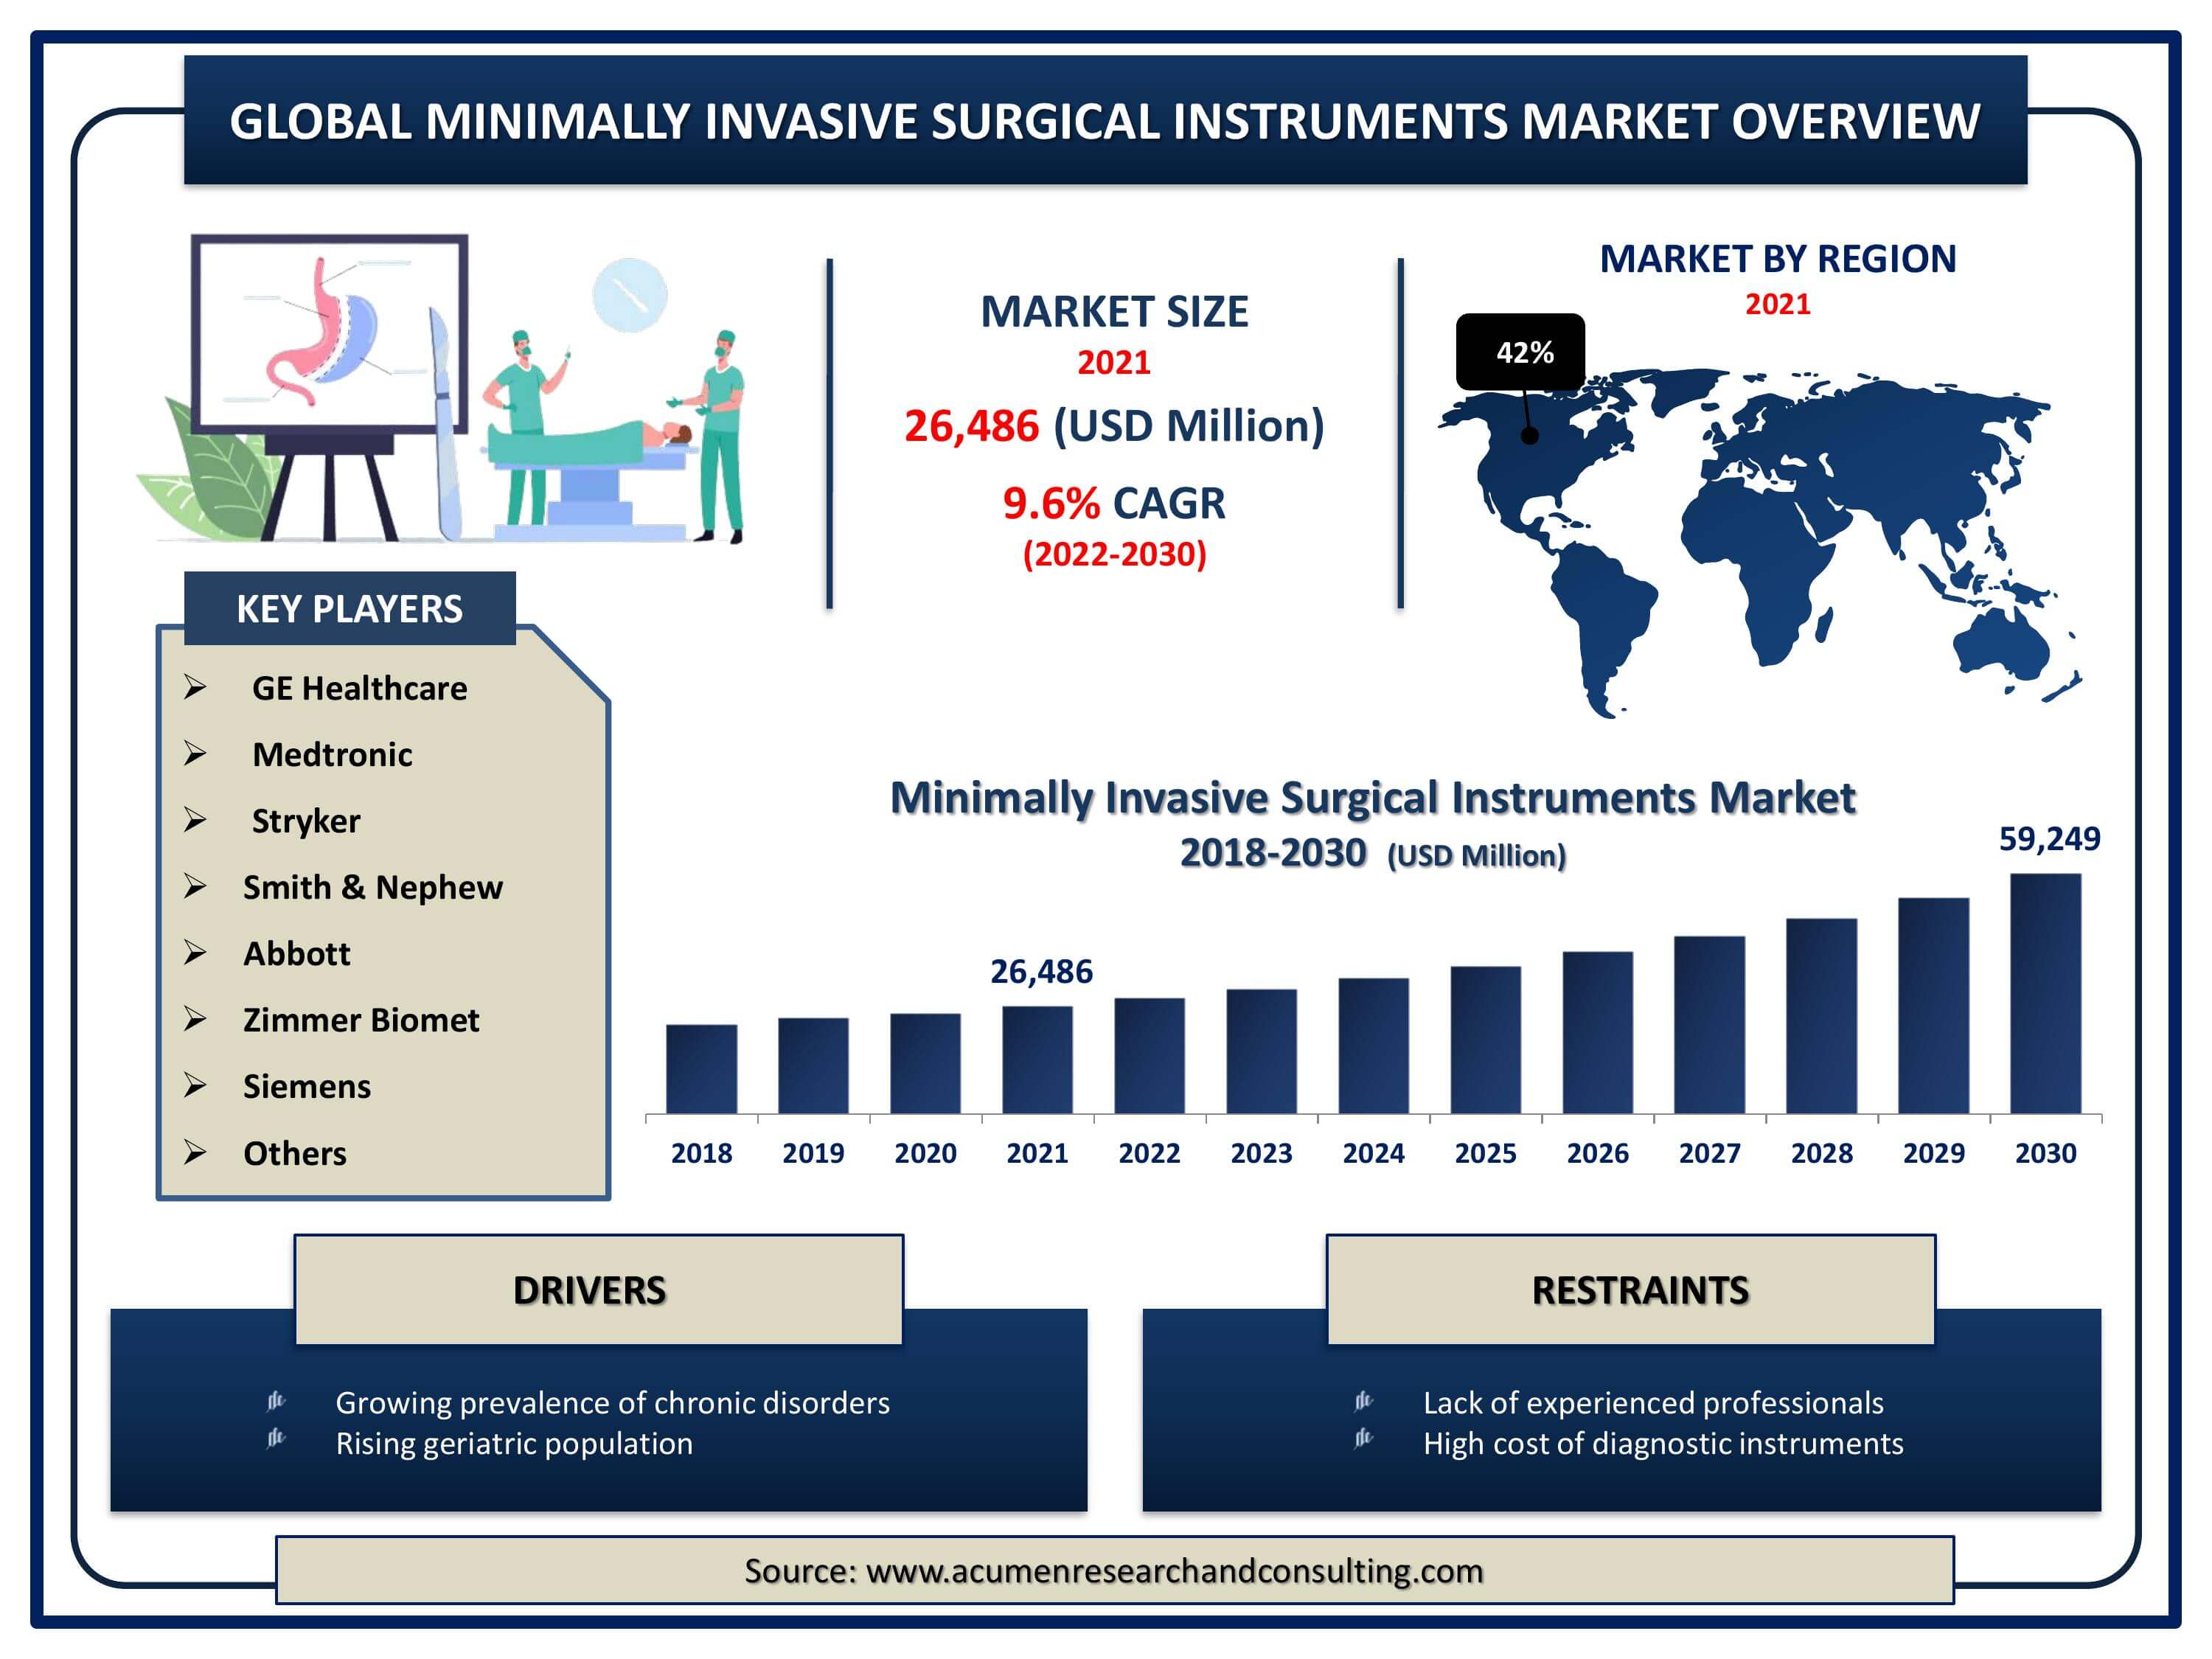 Minimally Invasive Surgical Instruments Market Size and Share